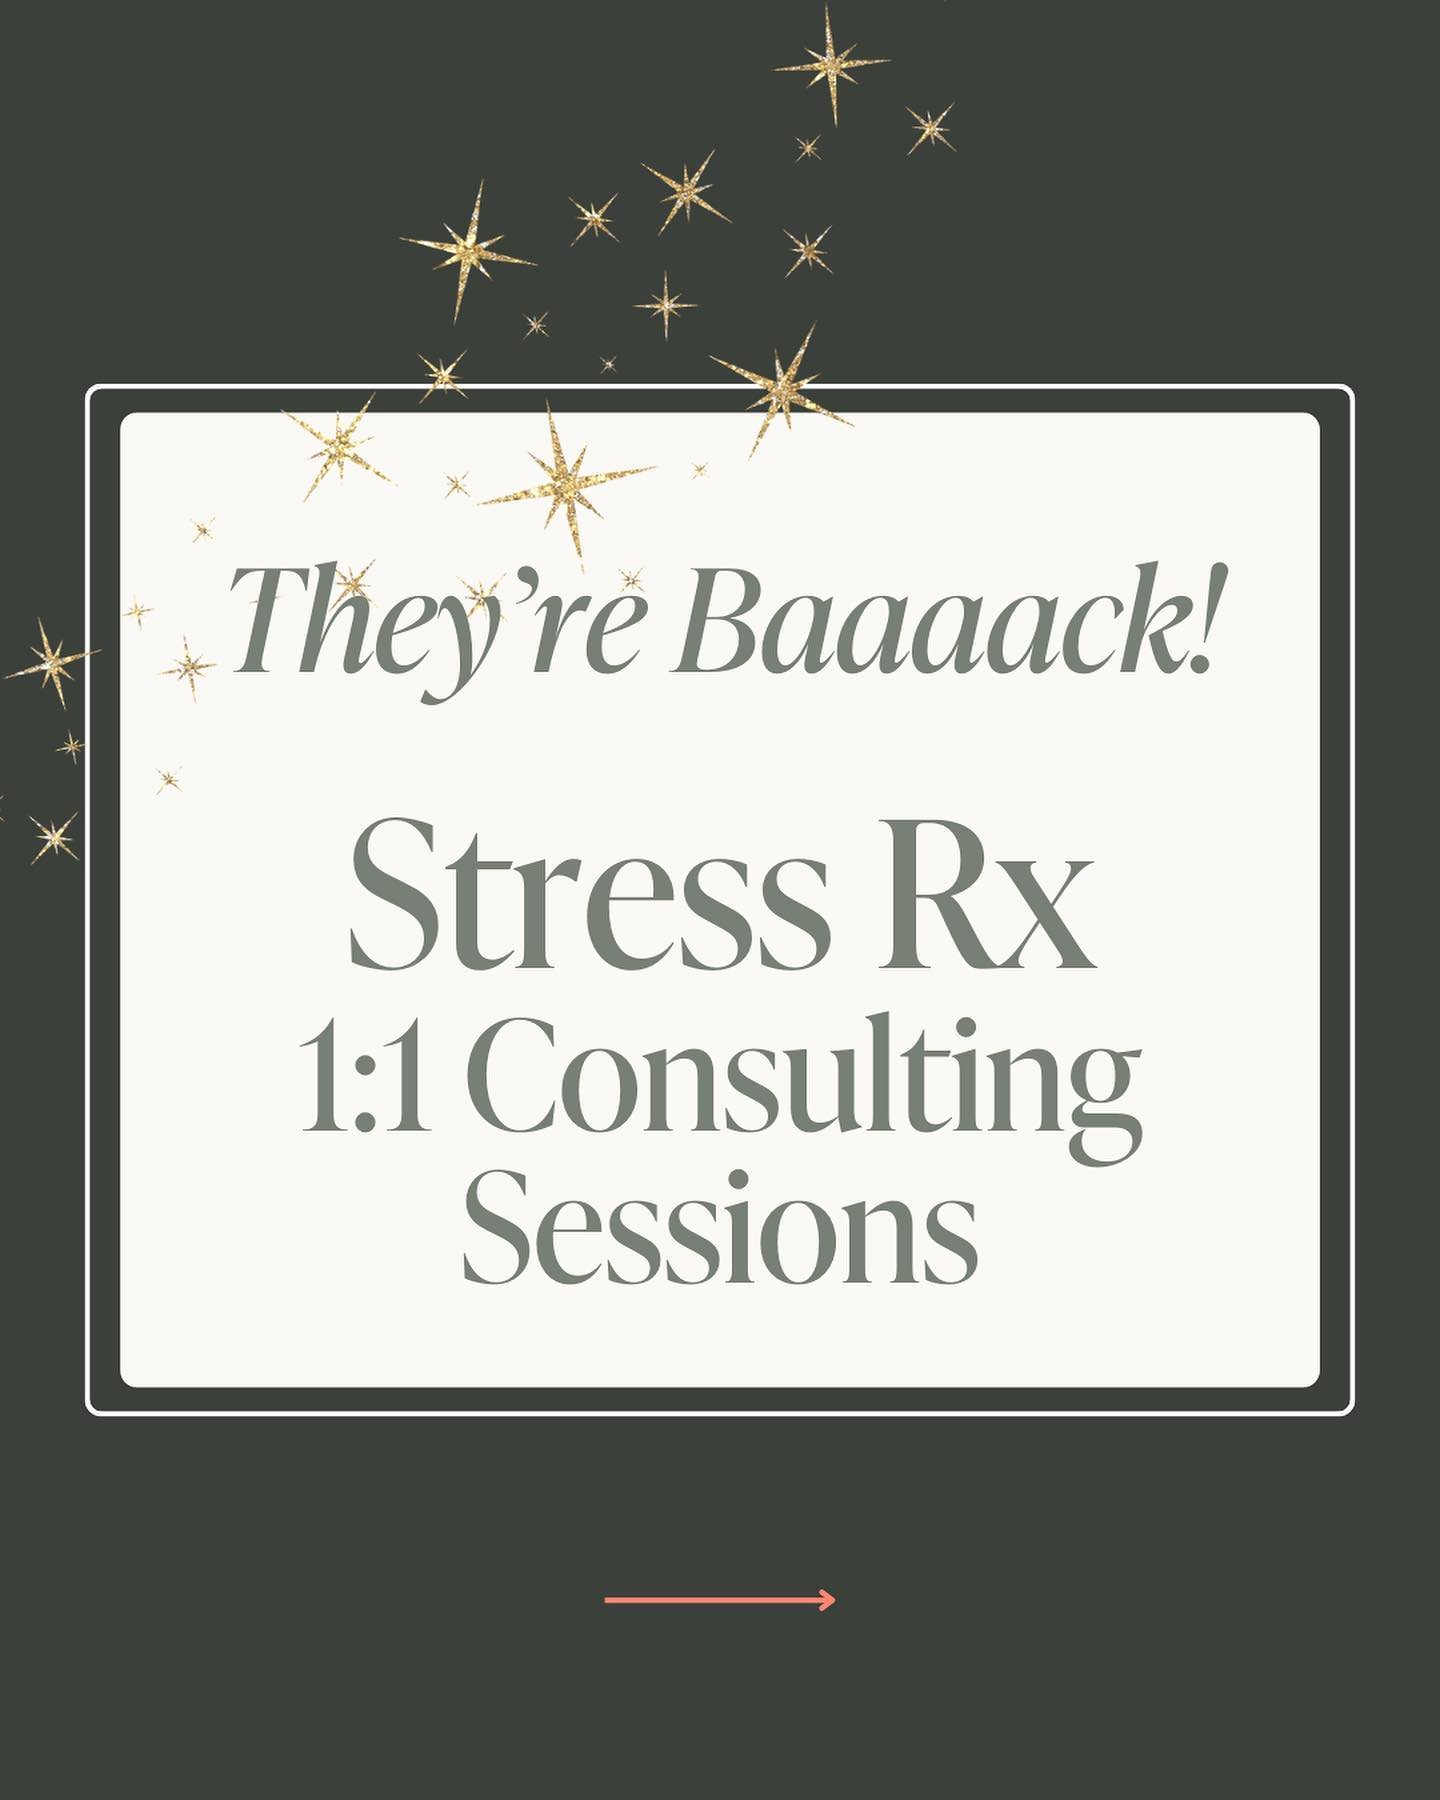 You&rsquo;ll get more clarity, focus, and relief in one hour than you&rsquo;ve had in the past year. 

Or so I&rsquo;ve been told by clients who&rsquo;ve jumped inside a Stress Rx 1:1 Consulting Session. 🤗

Not sure what that means for you? 

Here&r